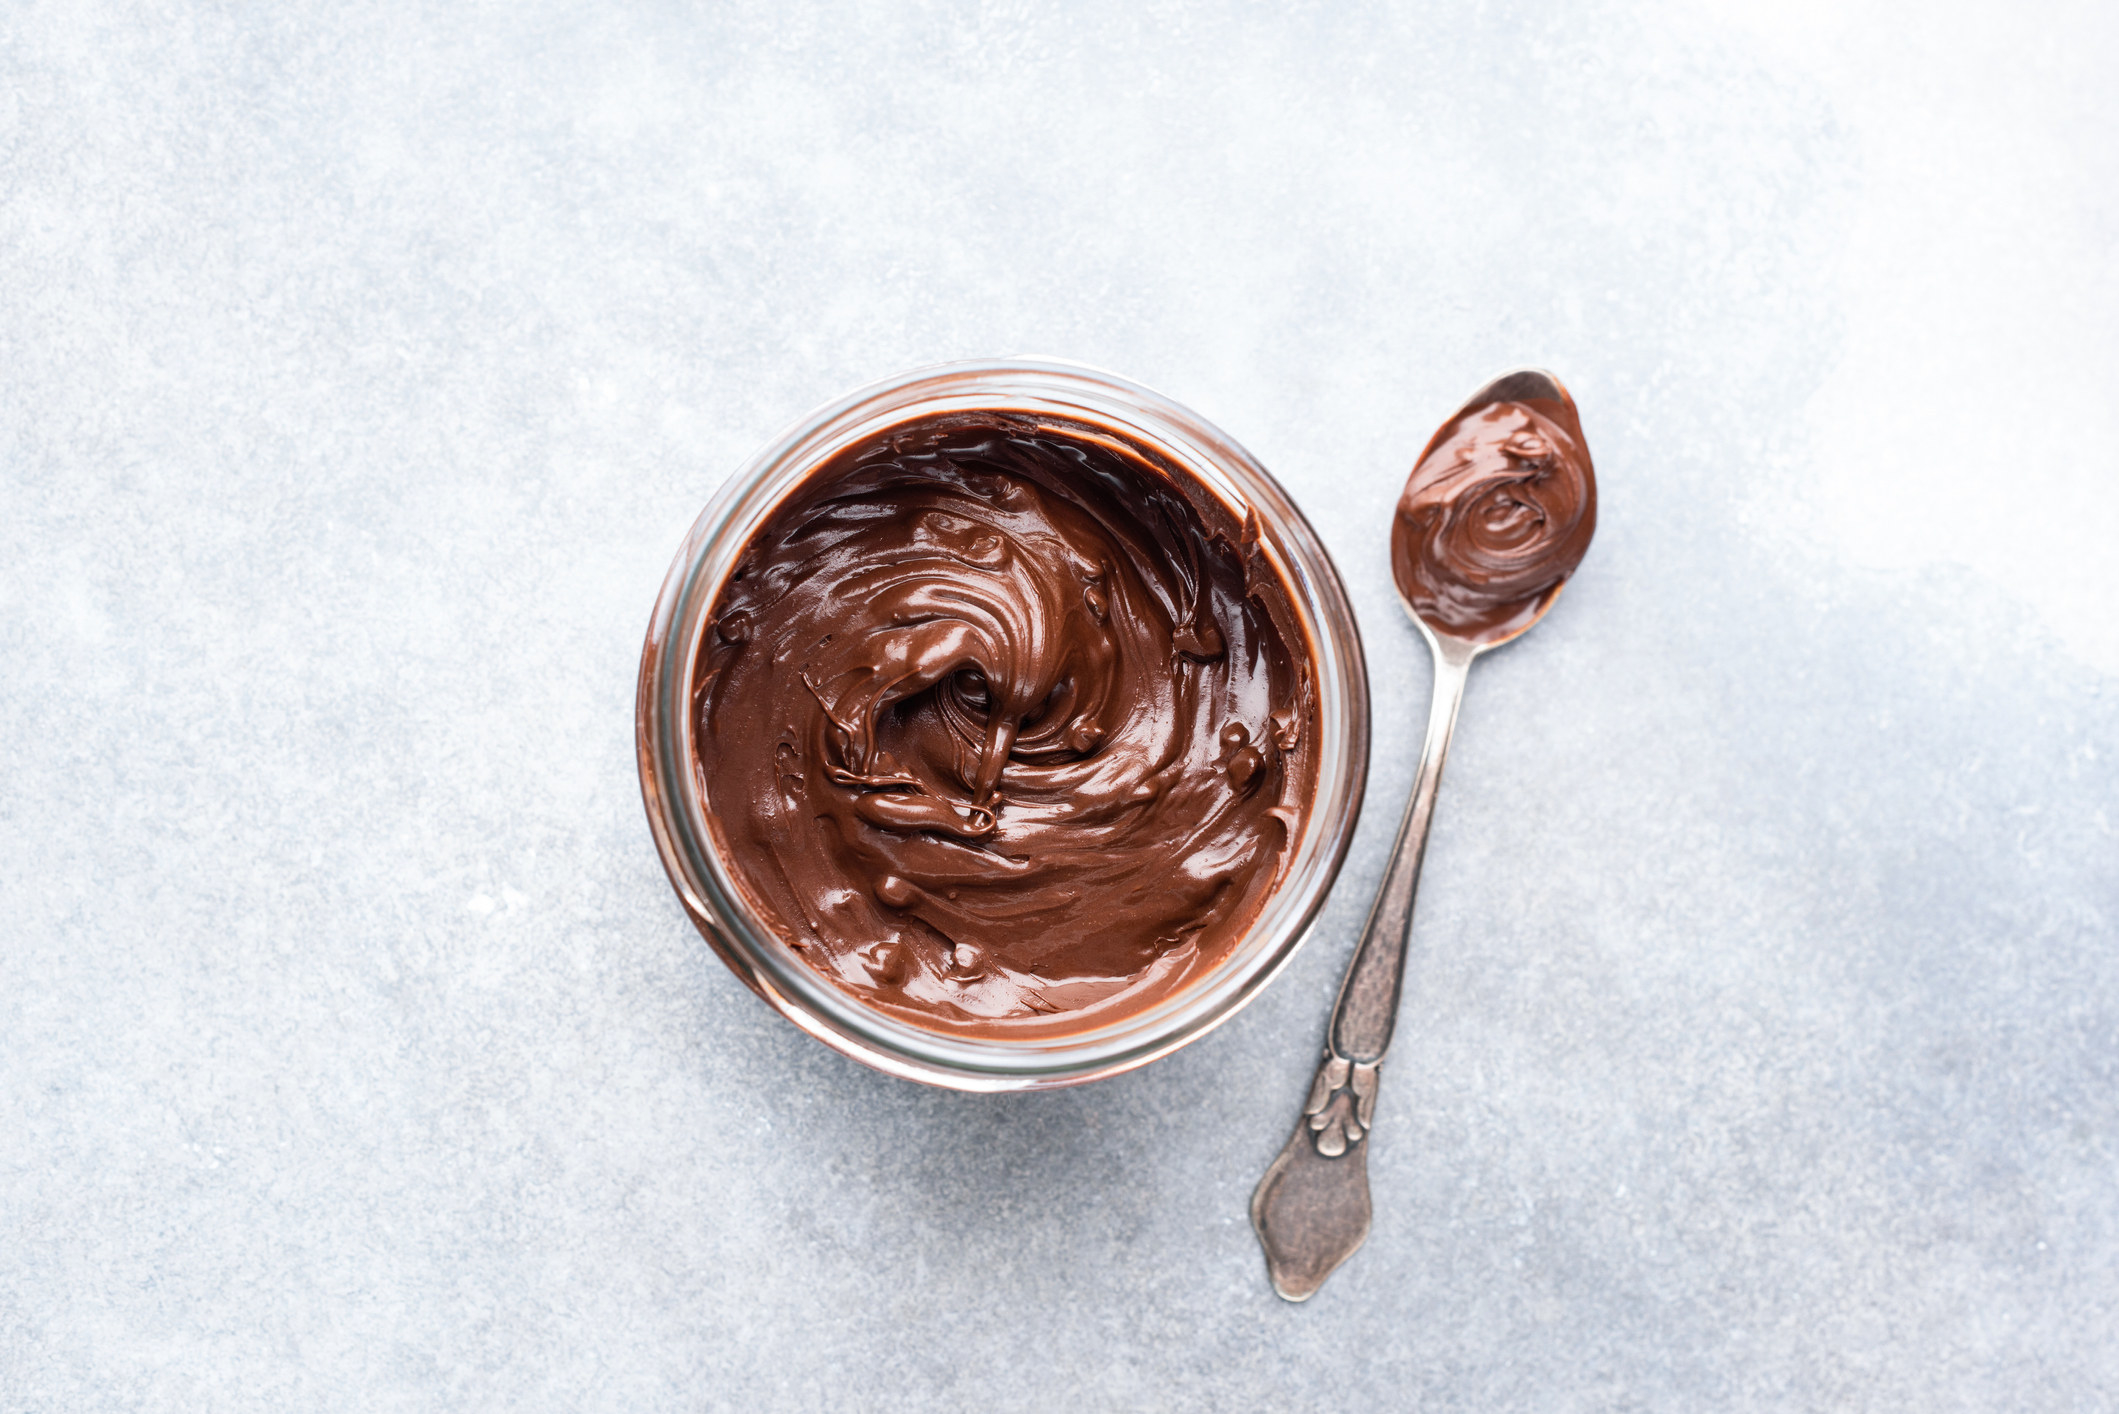 A jar of Nutella seen from above, next to a spoon with Nutella in it